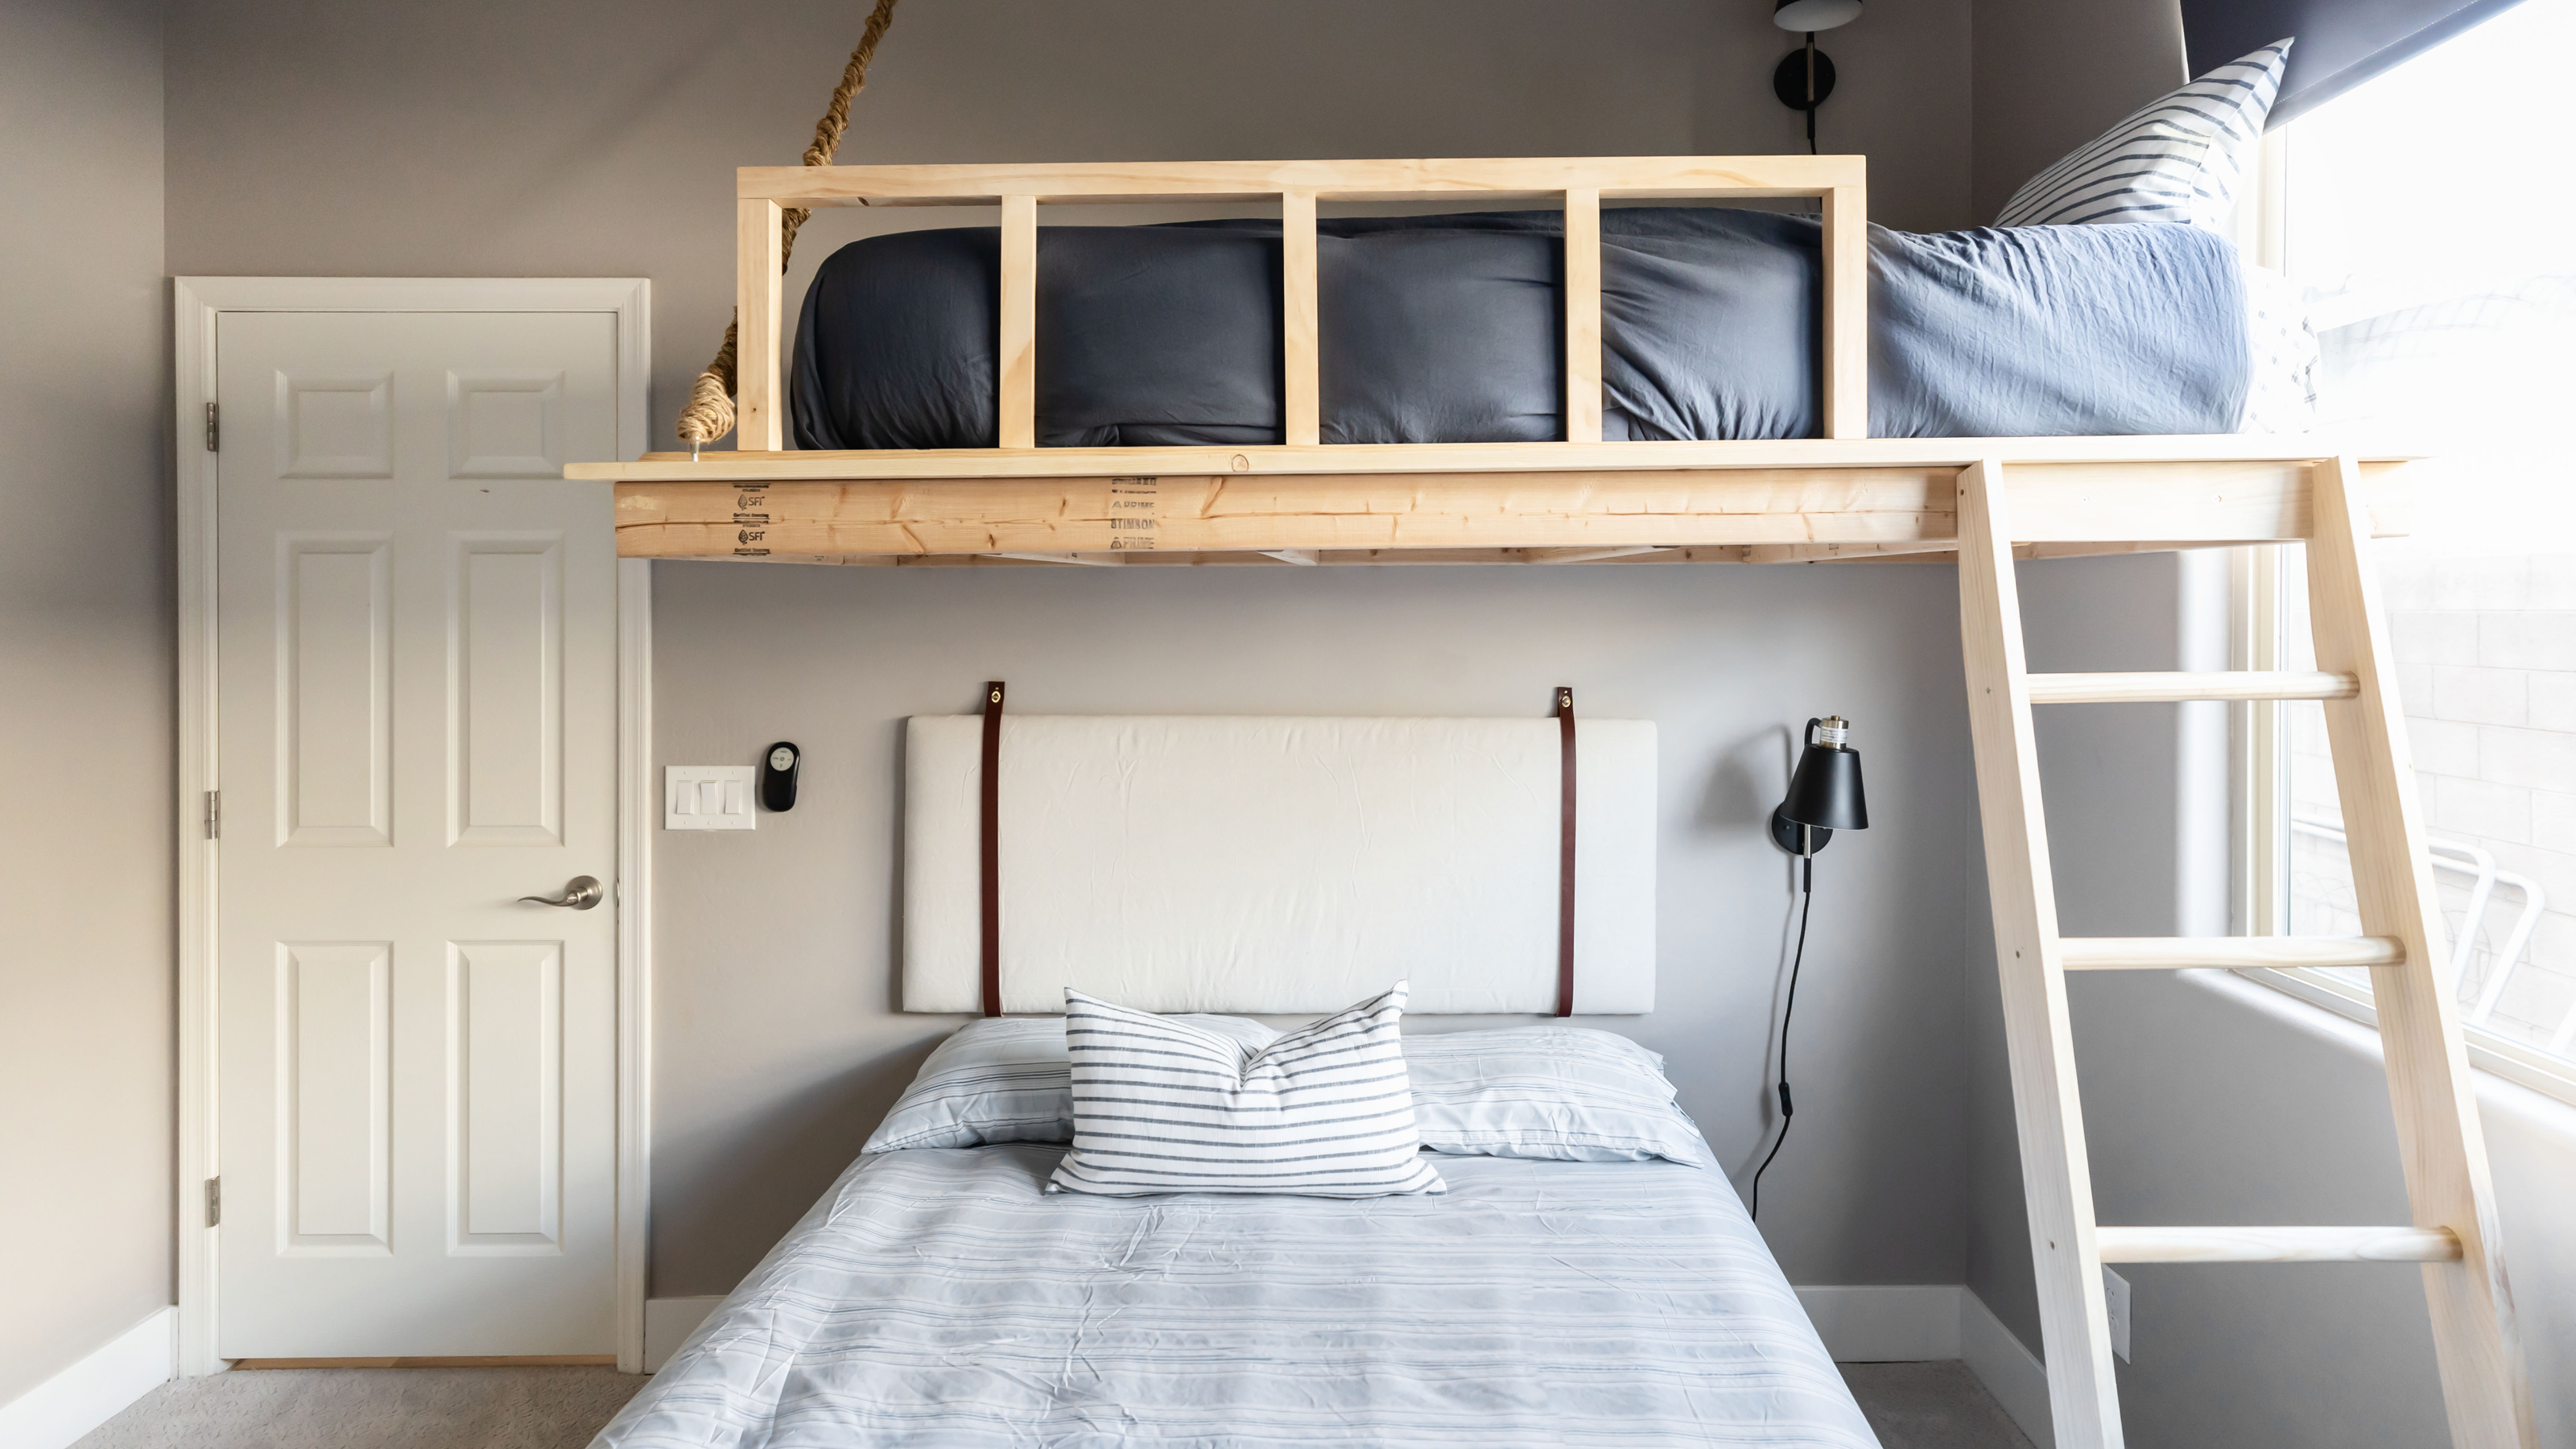 How To Build A Loft Bed Diy With This, Easy To Make Up Bunk Beds